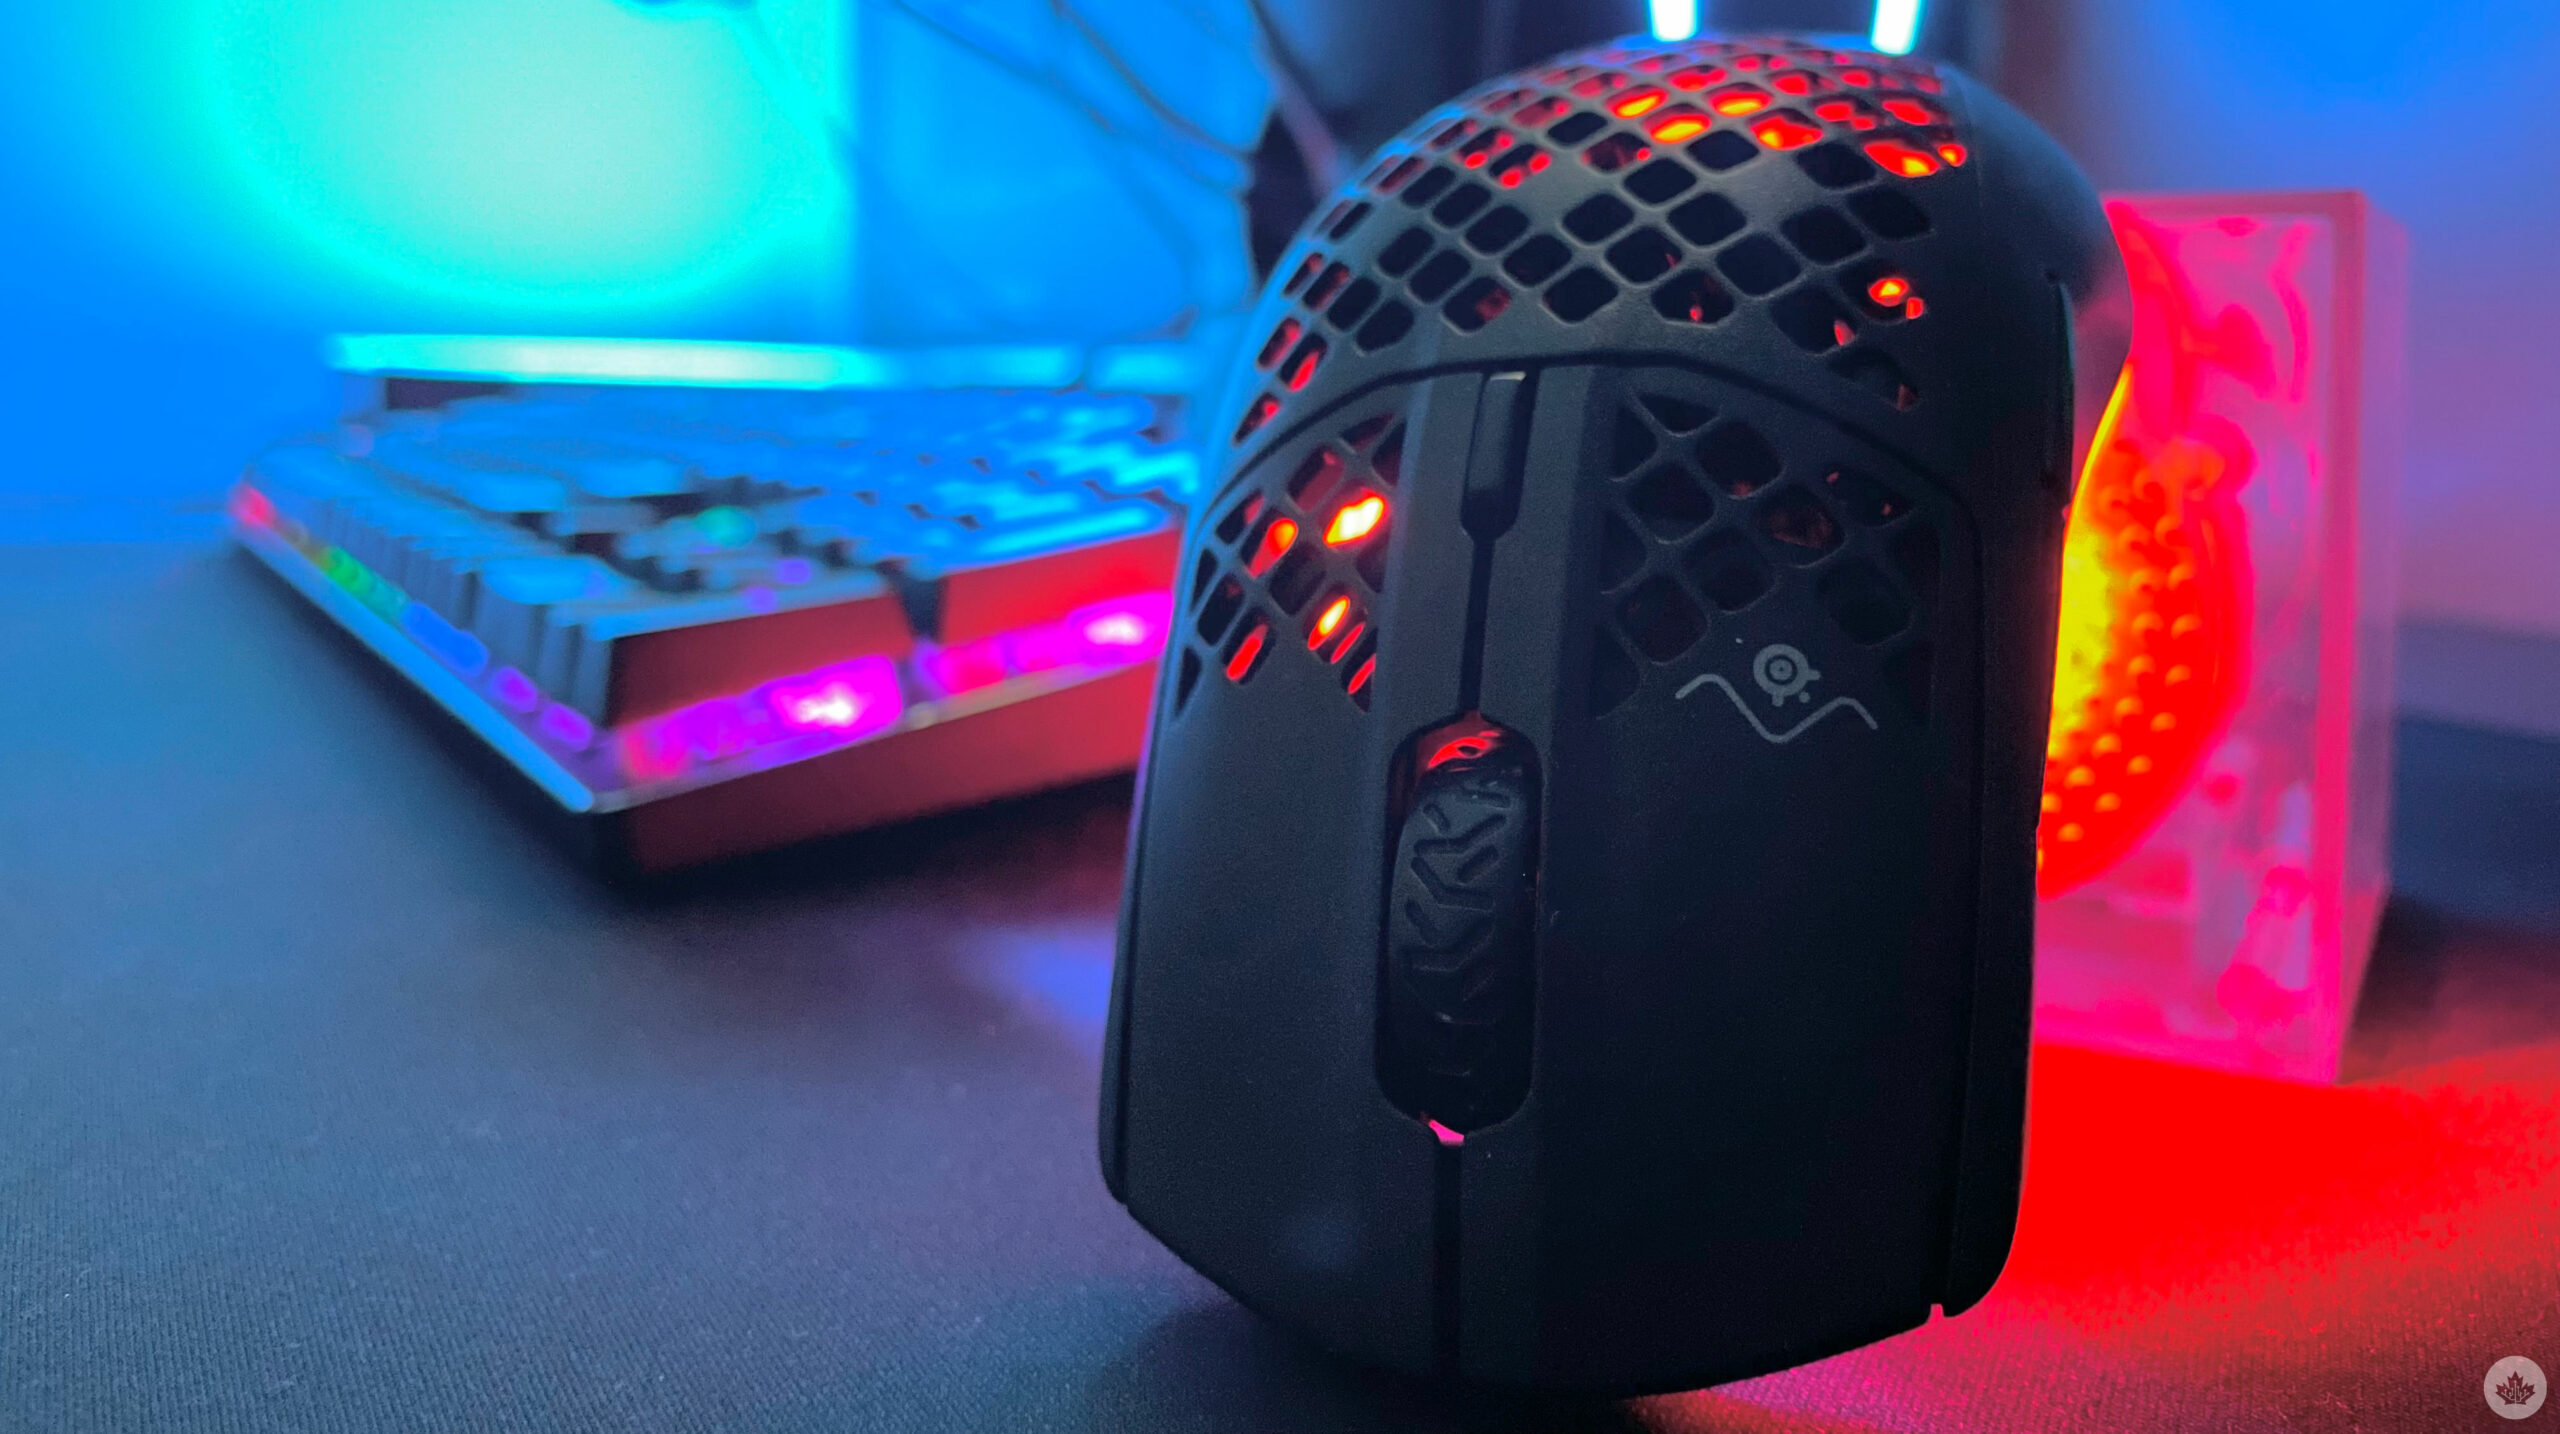 3 compact SteelSeries style combines Aerox package and performance in a Wireless